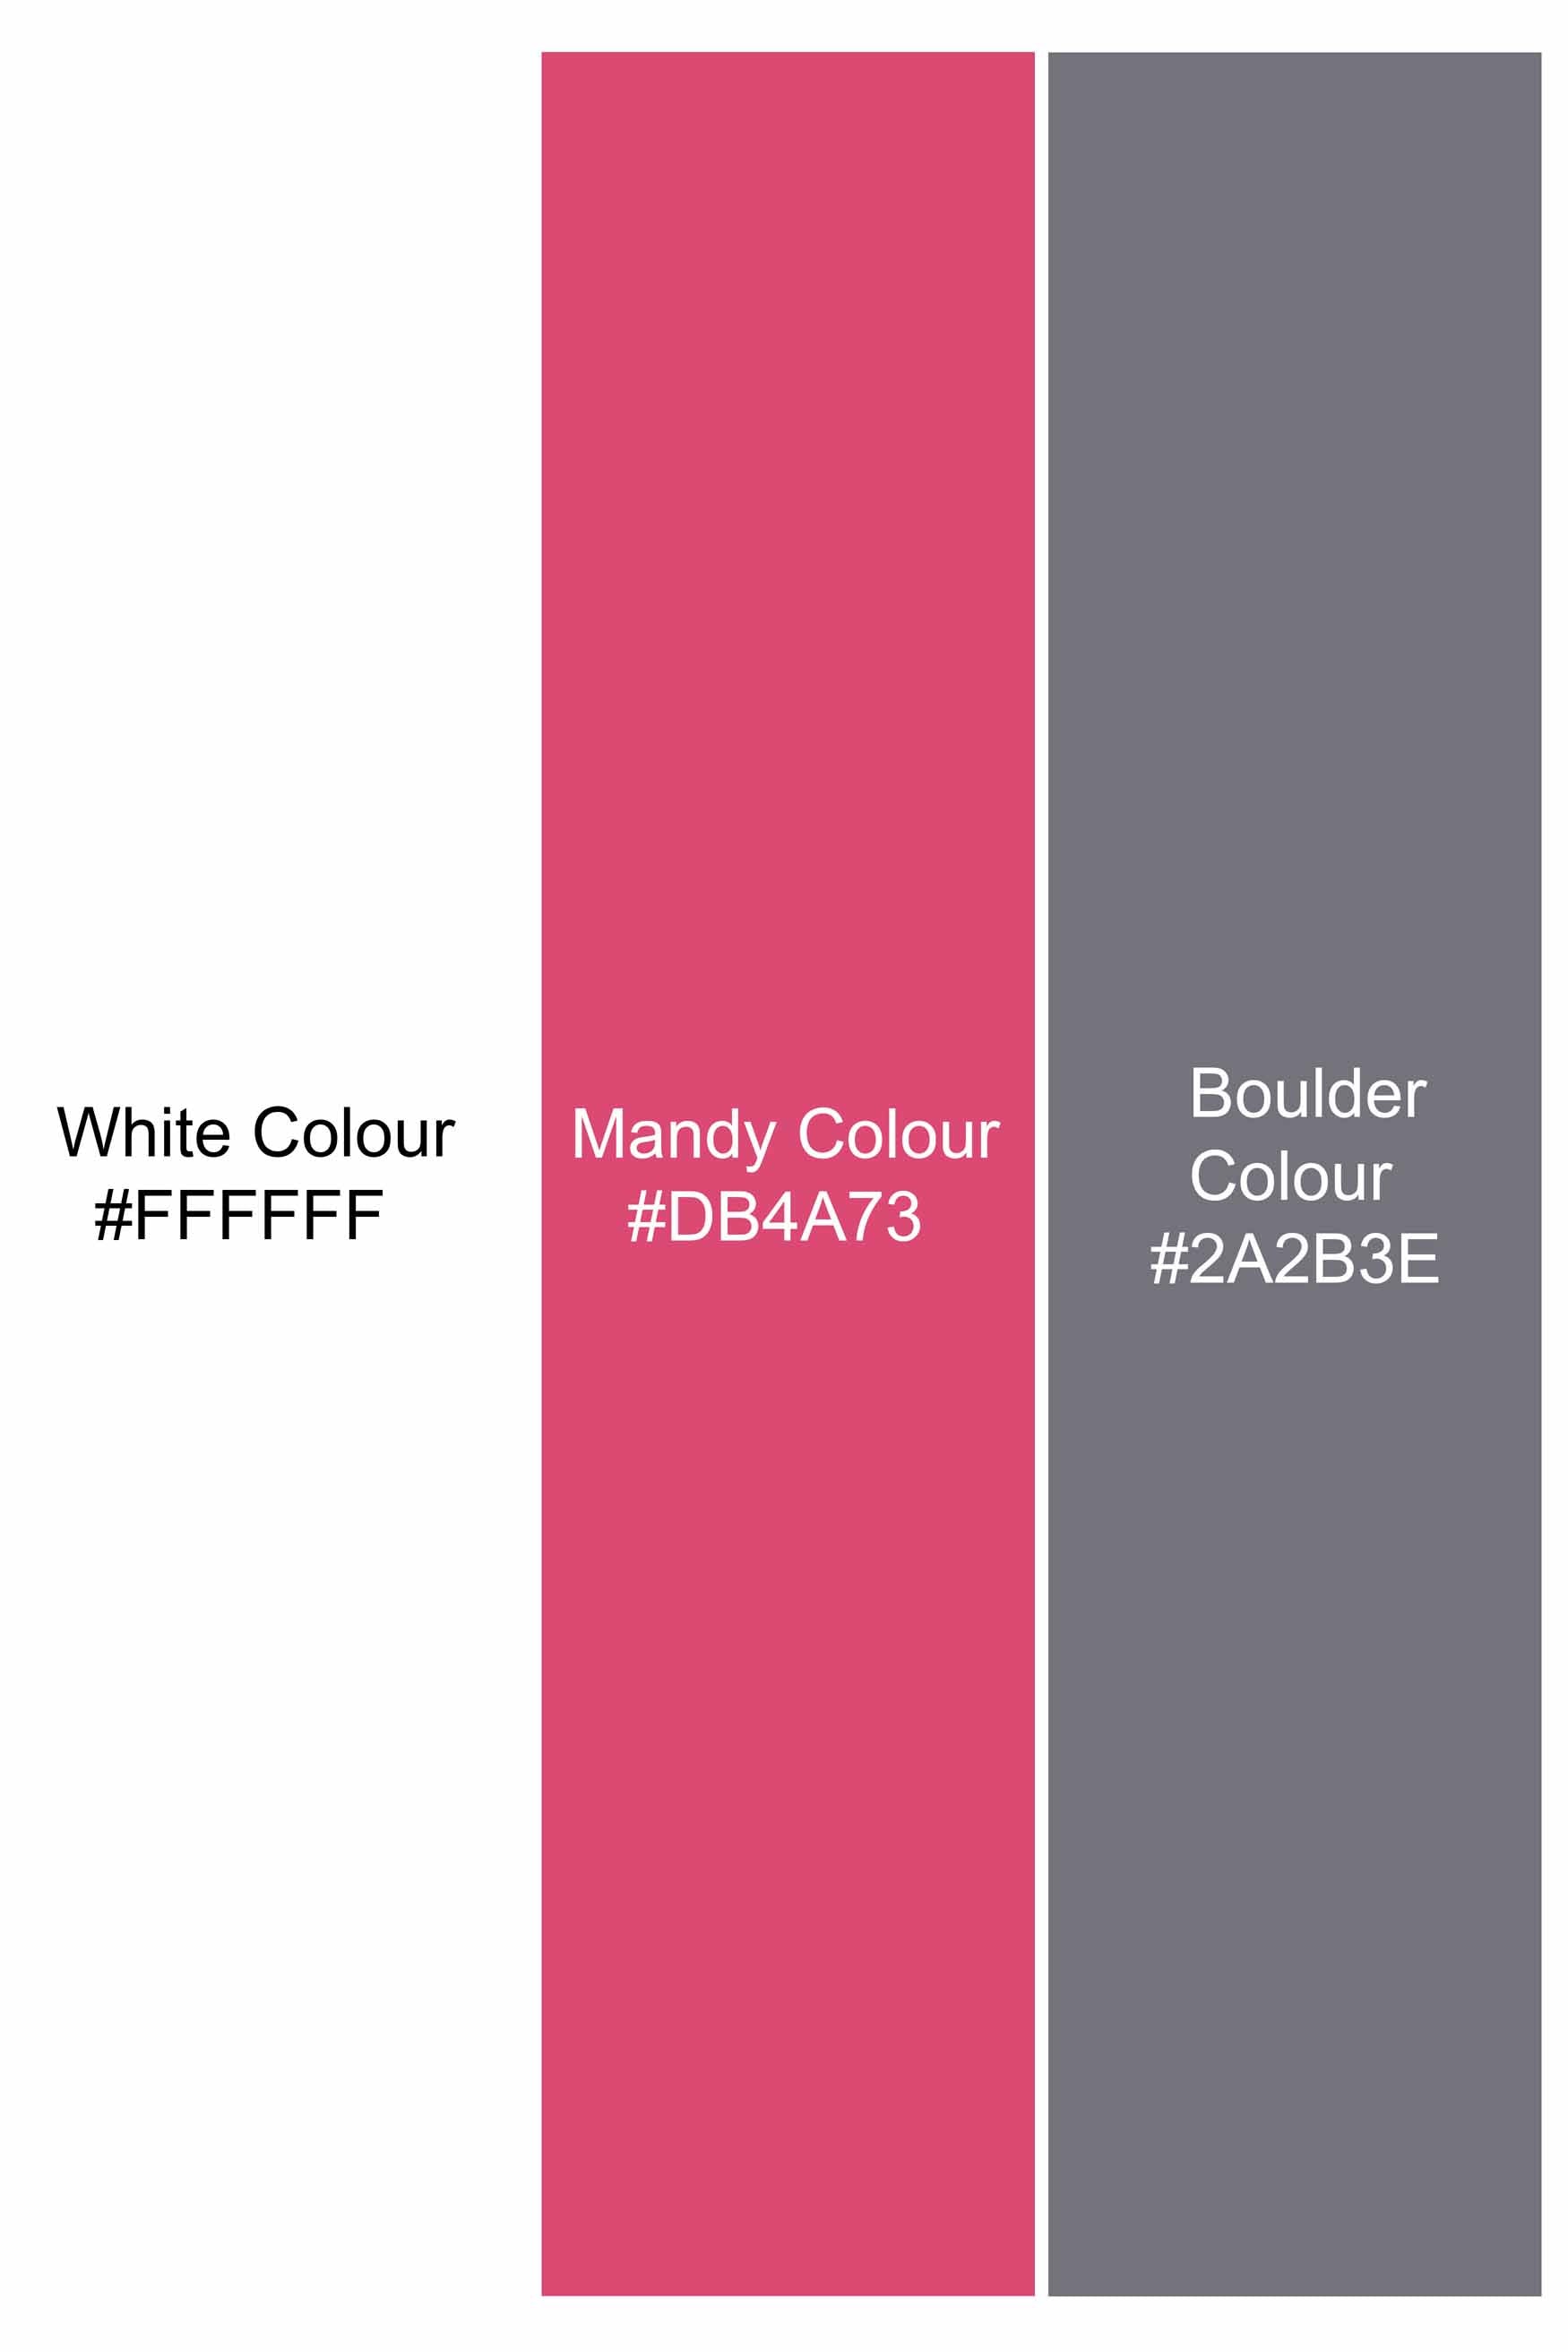 Bright White with Mandy Pink and Boulder Gray Striped Royal Oxford Shirt 11582-BLK-38, 11582-BLK-H-38, 11582-BLK-39, 11582-BLK-H-39, 11582-BLK-40, 11582-BLK-H-40, 11582-BLK-42, 11582-BLK-H-42, 11582-BLK-44, 11582-BLK-H-44, 11582-BLK-46, 11582-BLK-H-46, 11582-BLK-48, 11582-BLK-H-48, 11582-BLK-50, 11582-BLK-H-50, 11582-BLK-52, 11582-BLK-H-52